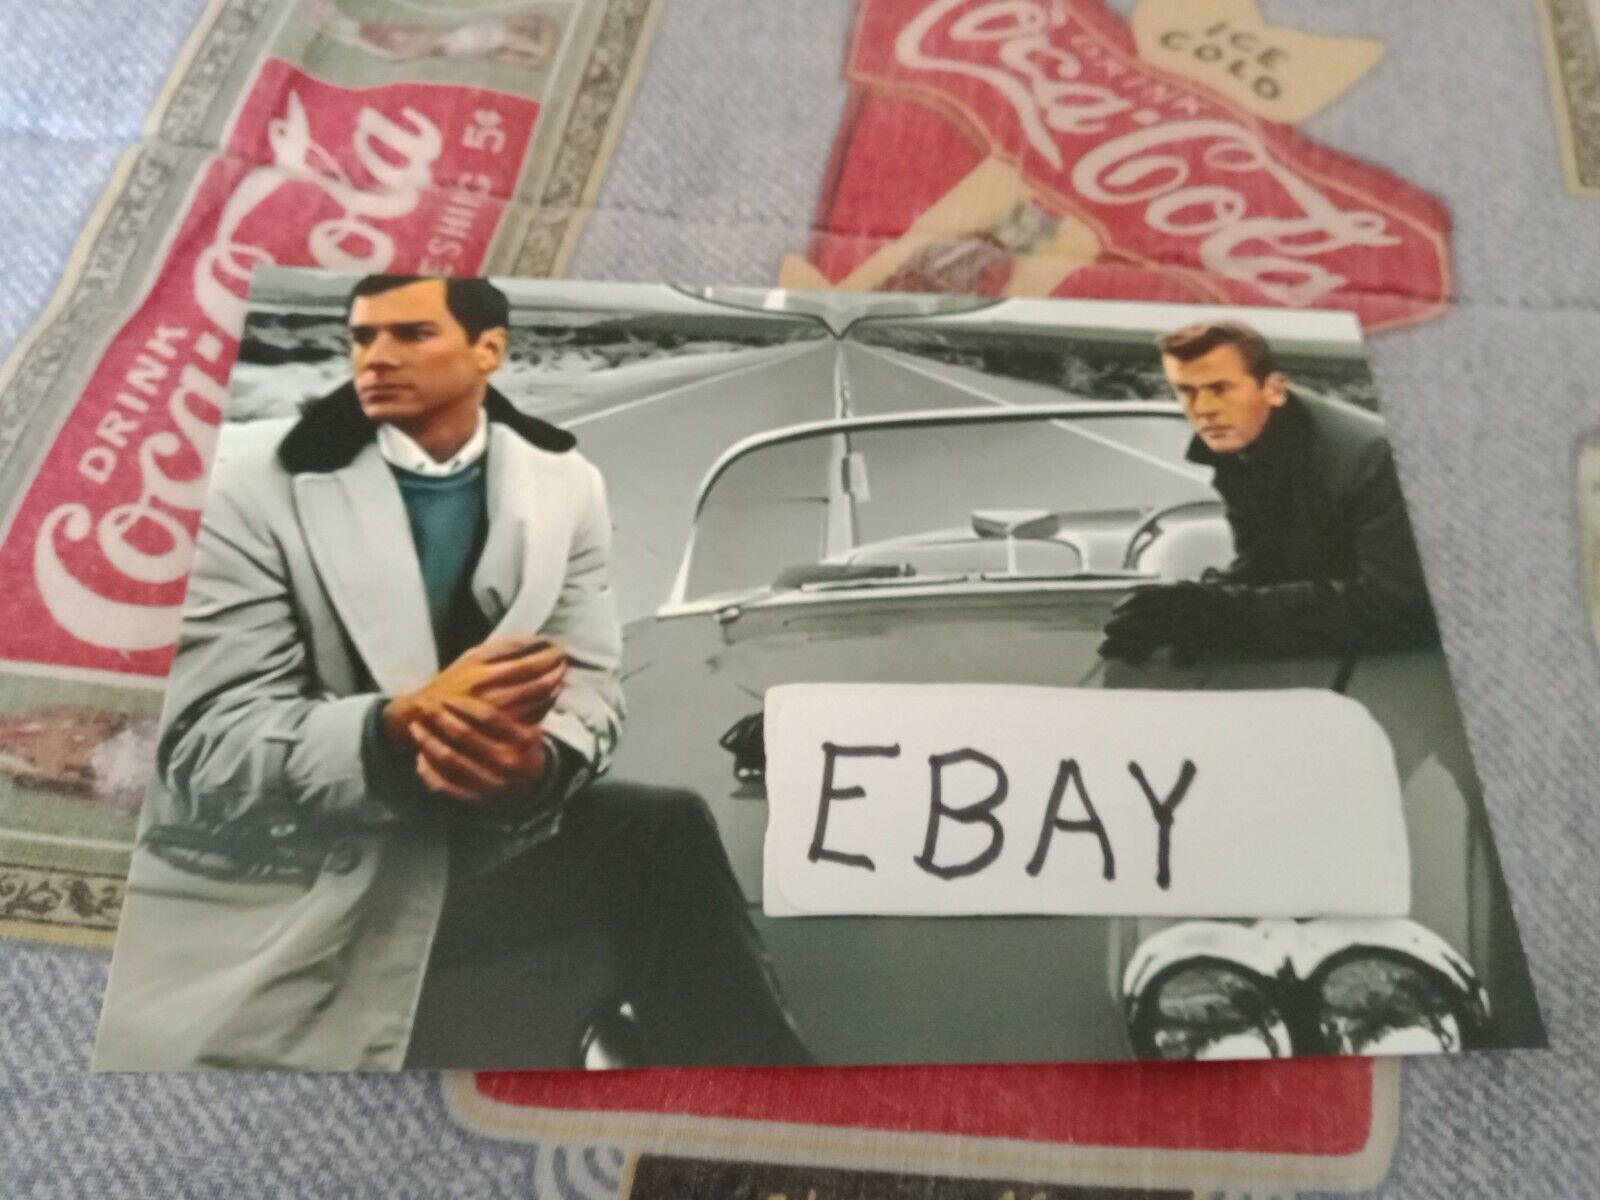 ROUTE 66, TV Show, Martin Milner, as Tod, George Maharis as Buz, Color 4X6 Photo